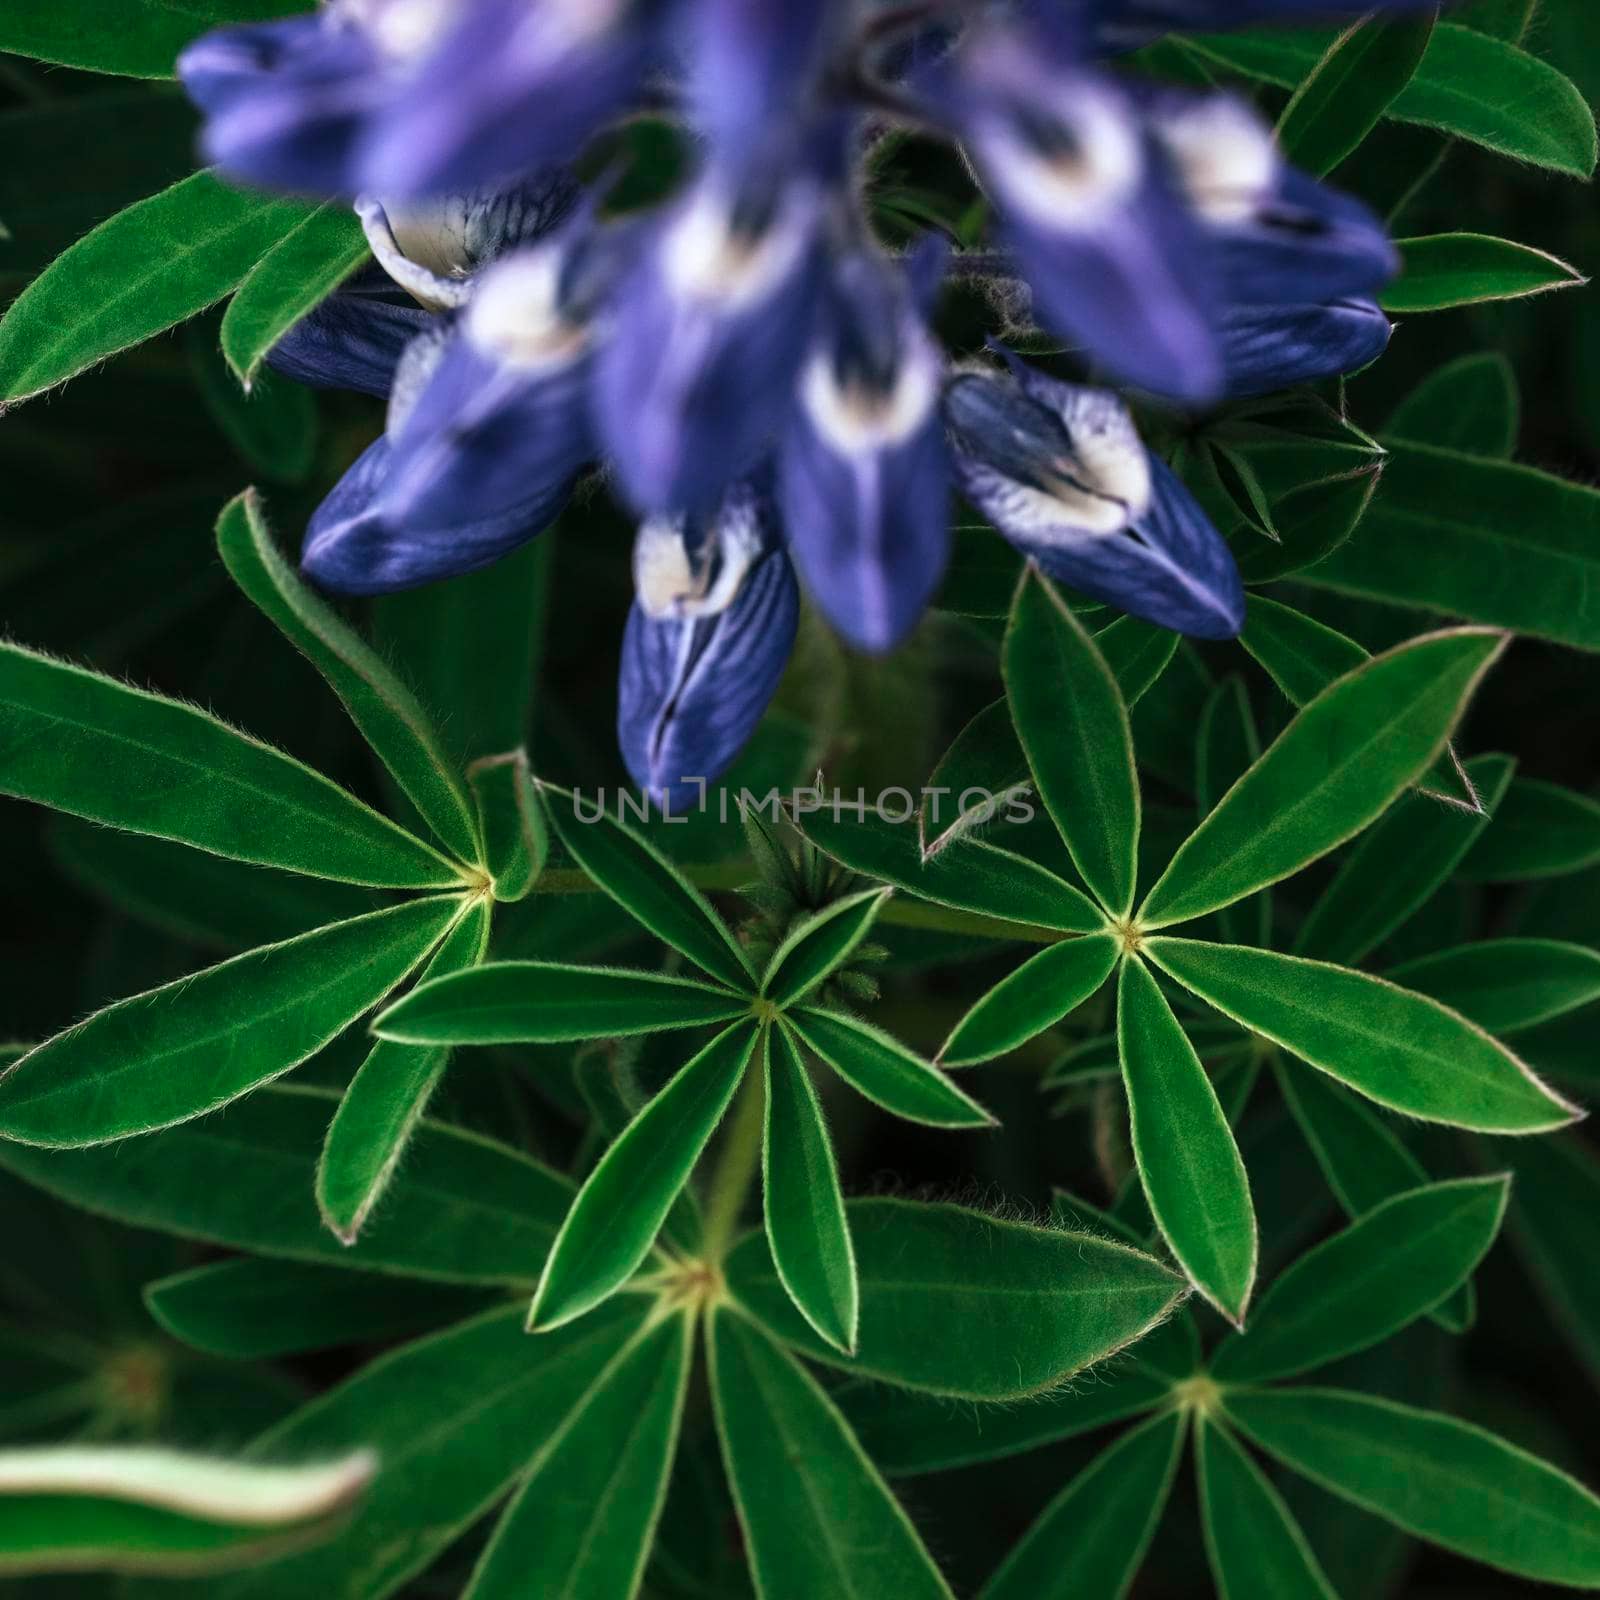 Wild blue lupine blooming in in summer by Standret